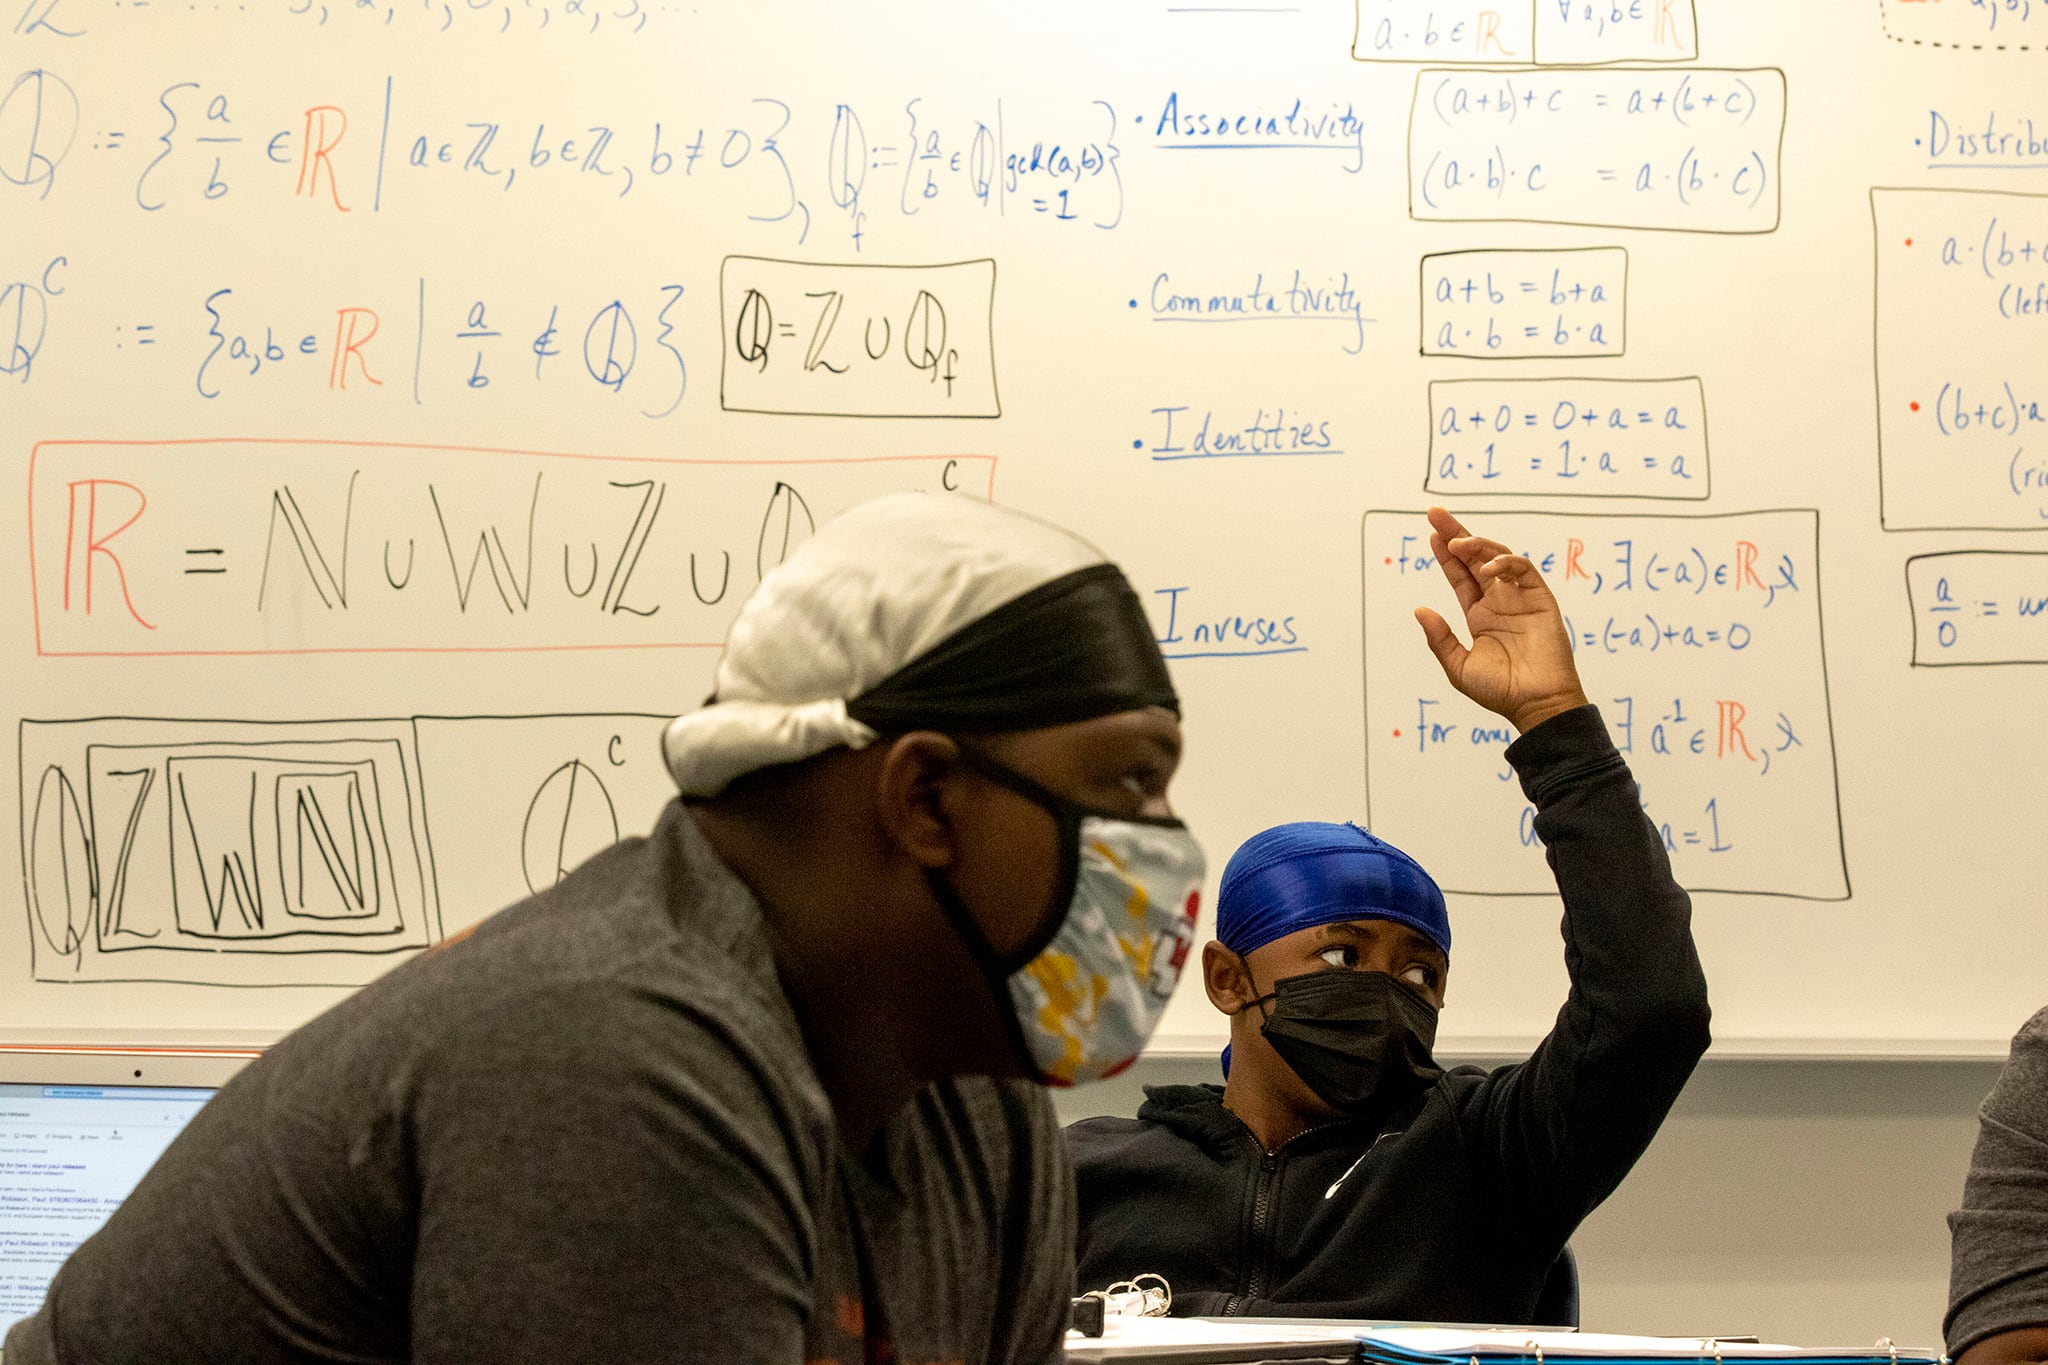 A Black student raises his hand in a classroom. A Black teacher can be seen in the foreground. Both are wearing face masks.